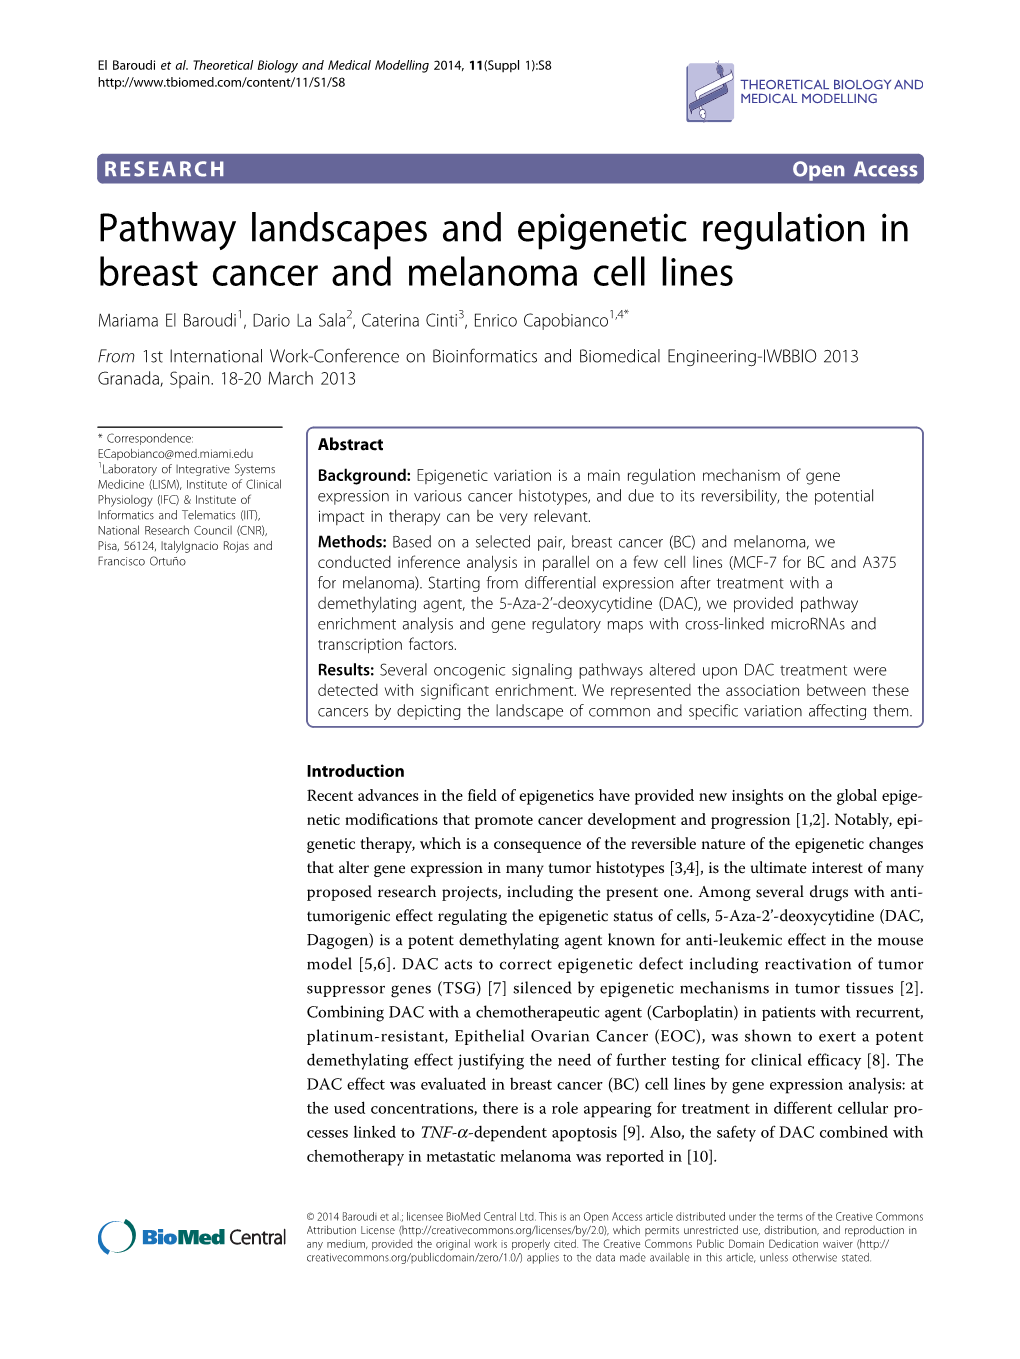 Pathway Landscapes and Epigenetic Regulation in Breast Cancer And